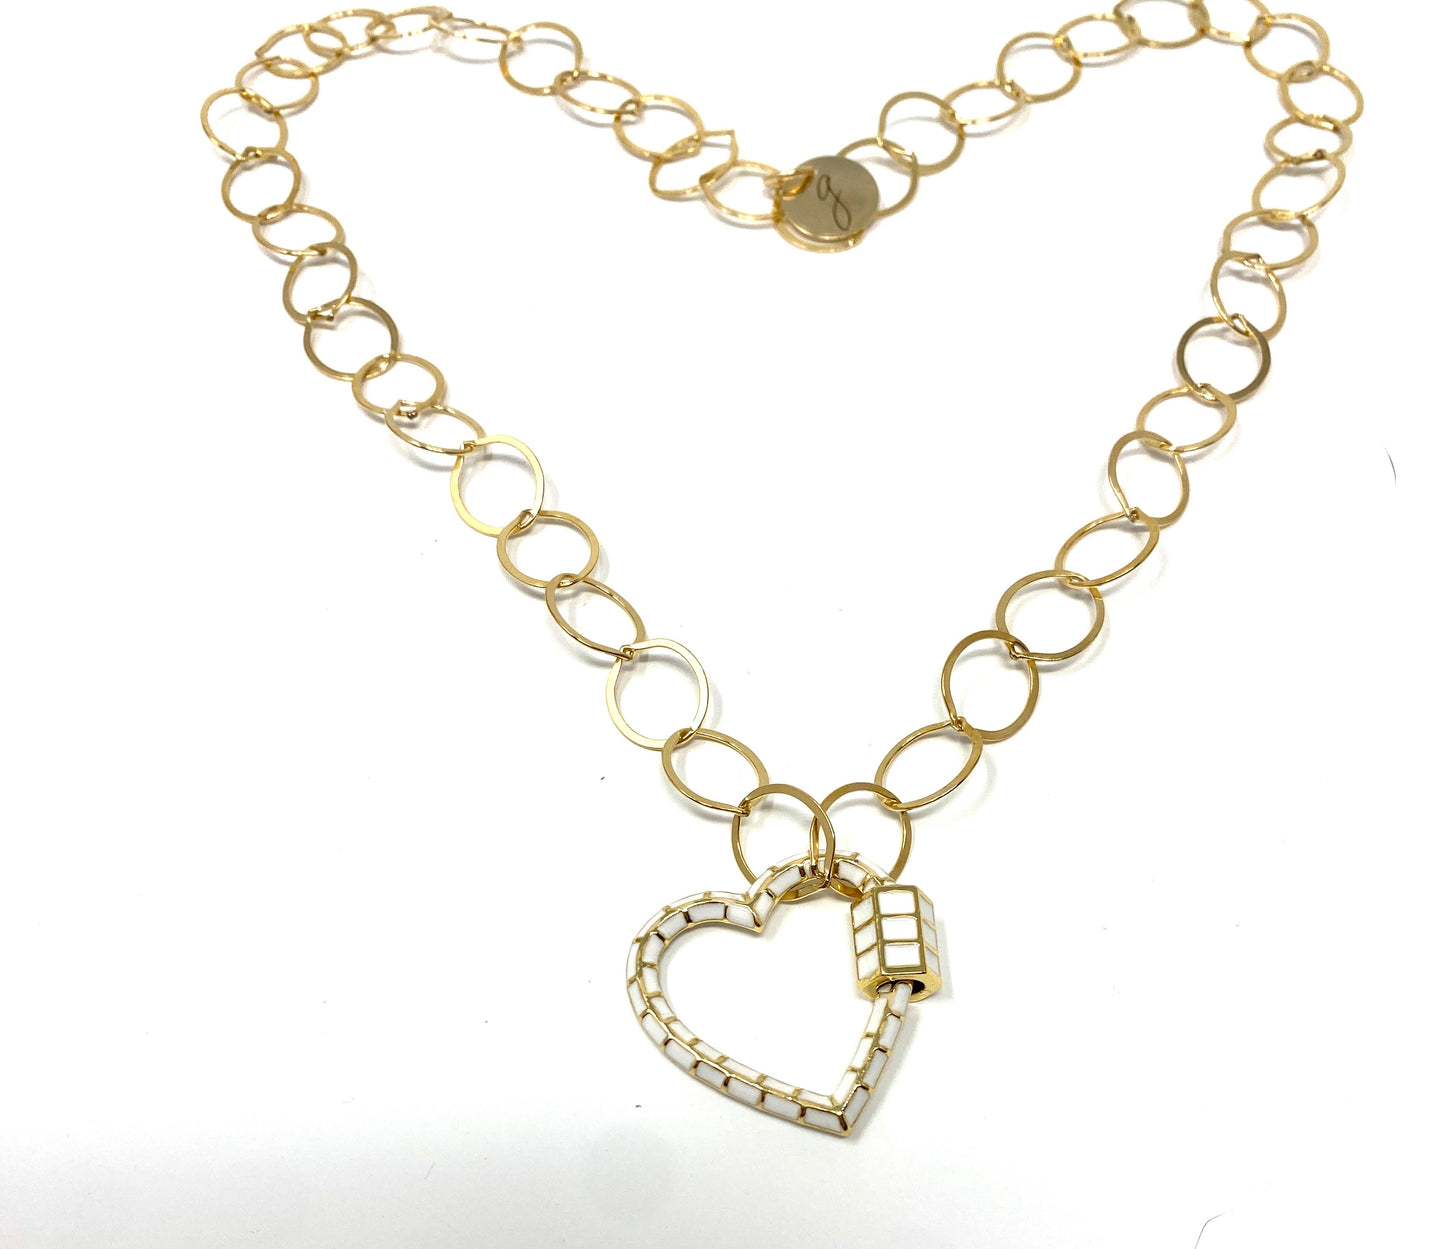 Gold Filled Chain Necklace With White Enamel Heart Carabiner